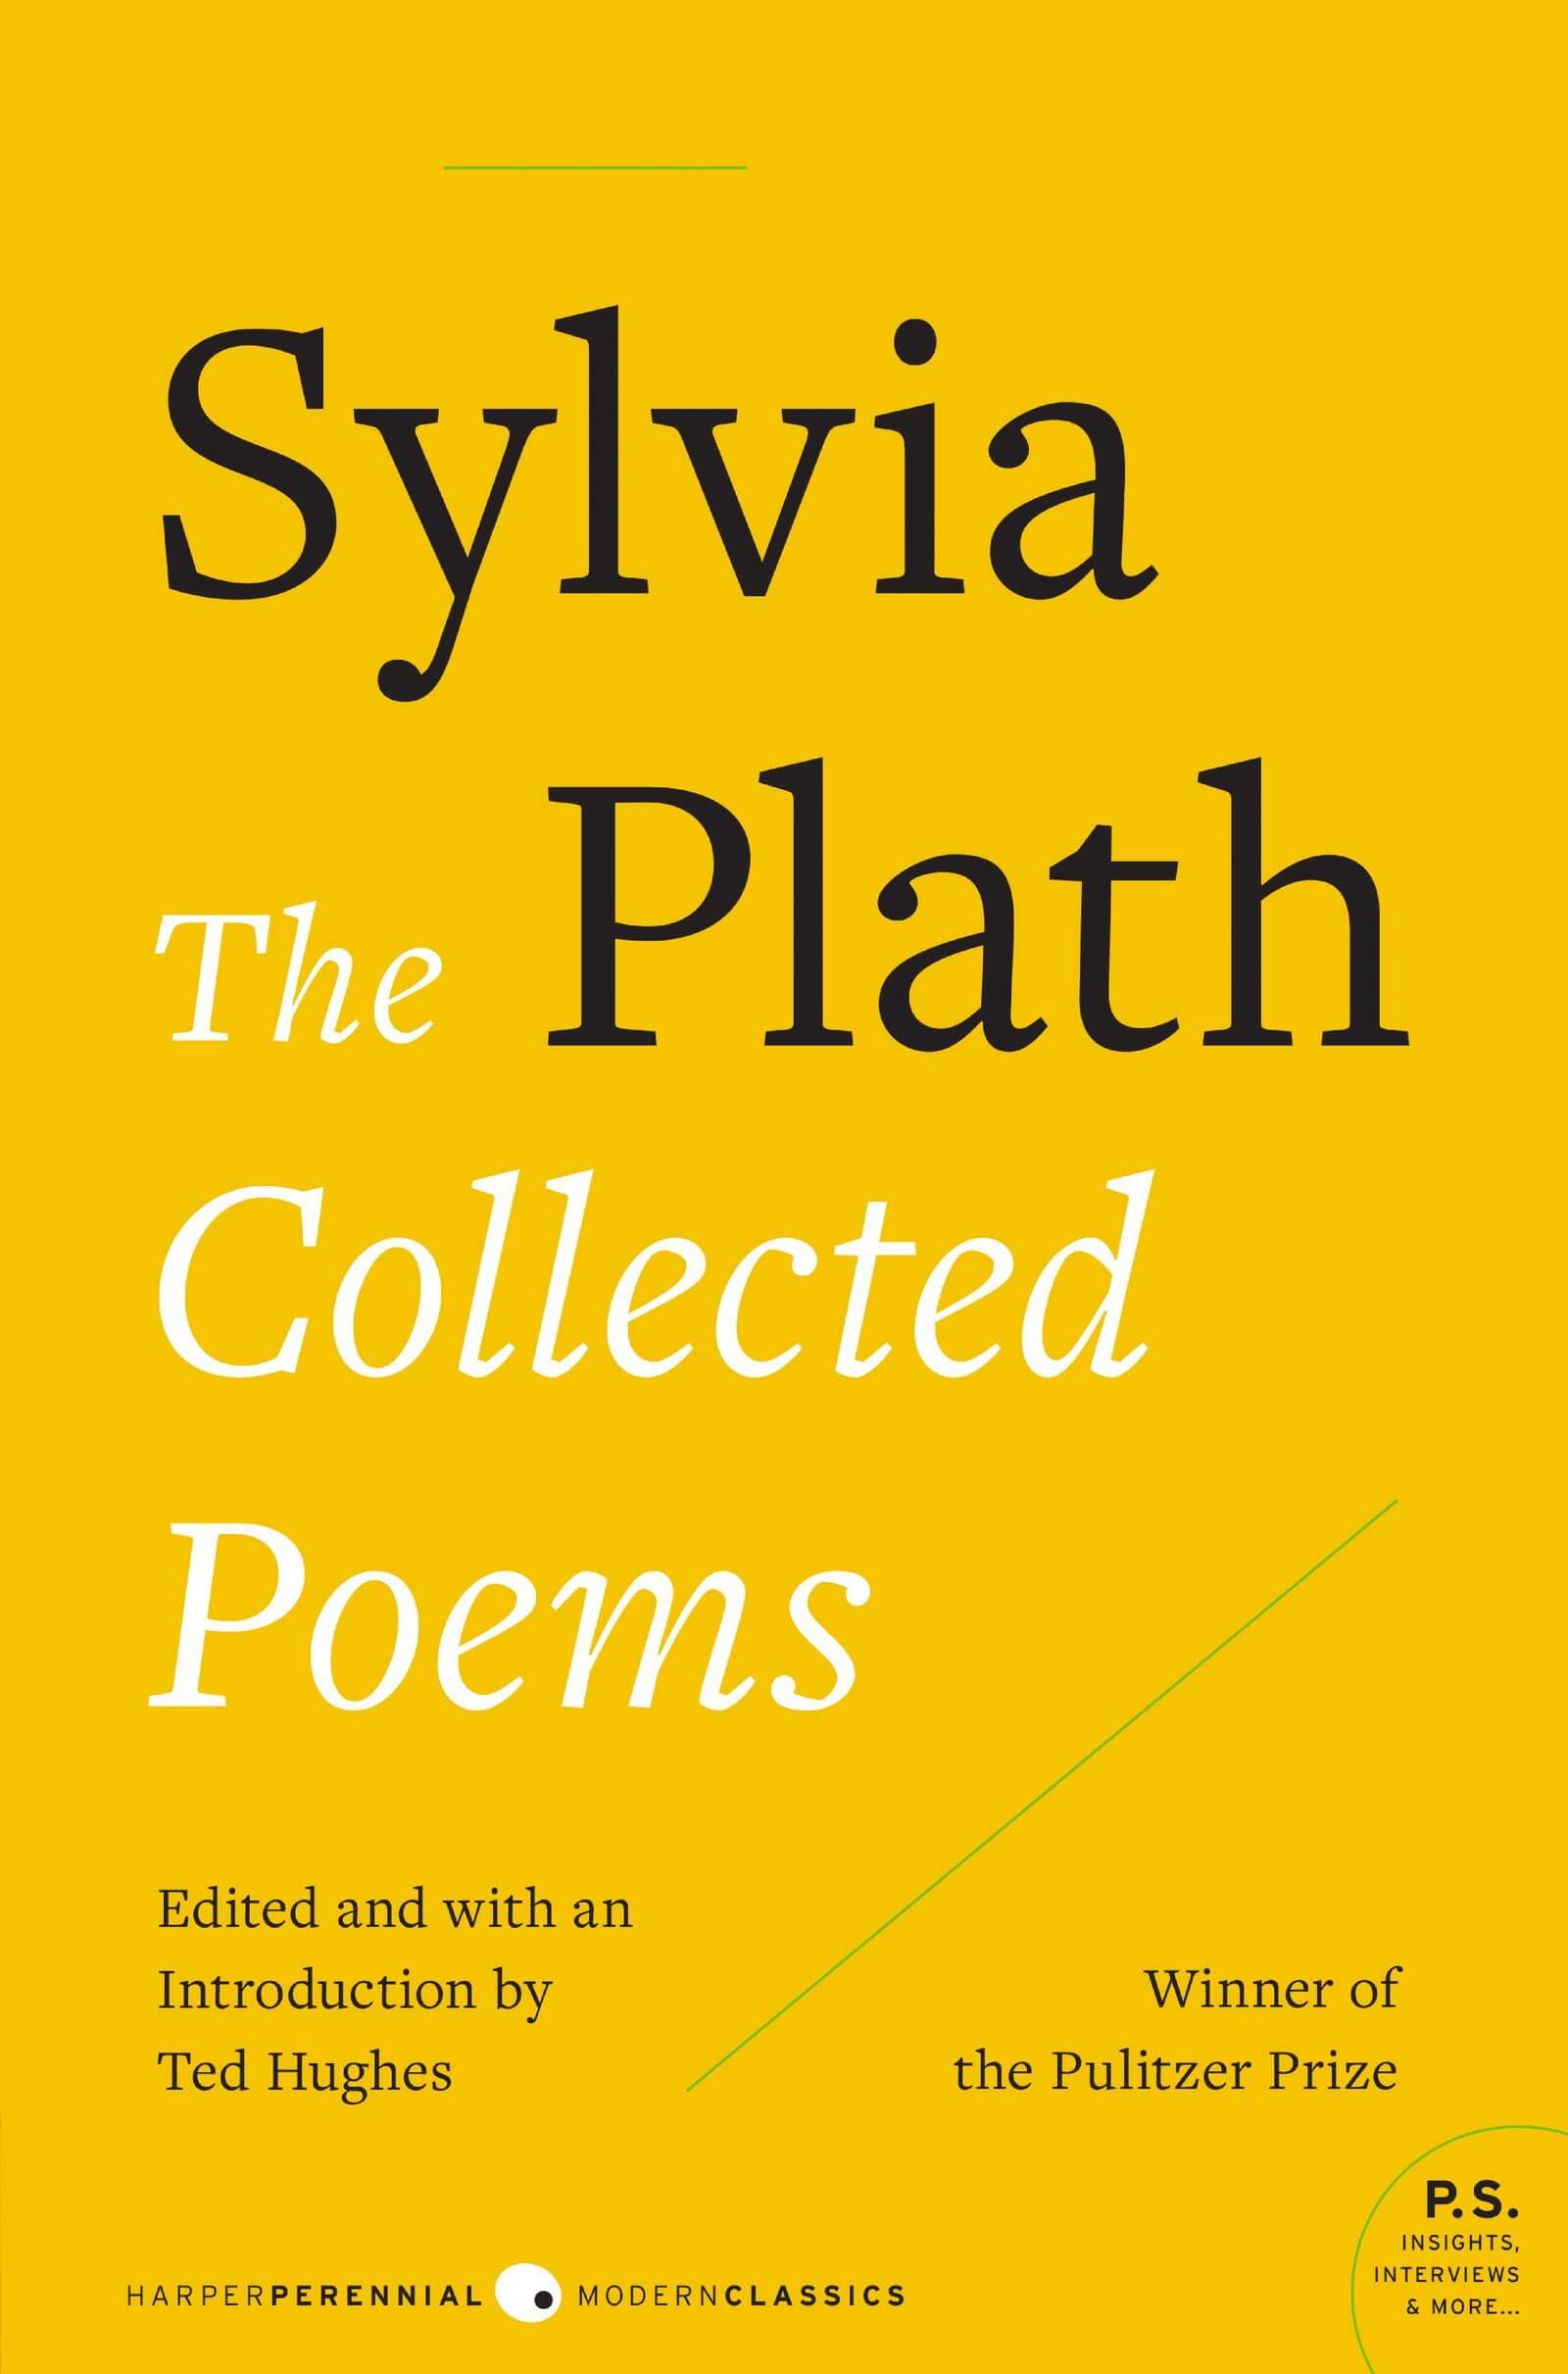 Cover of The Collected Poems by Sylvia Plath